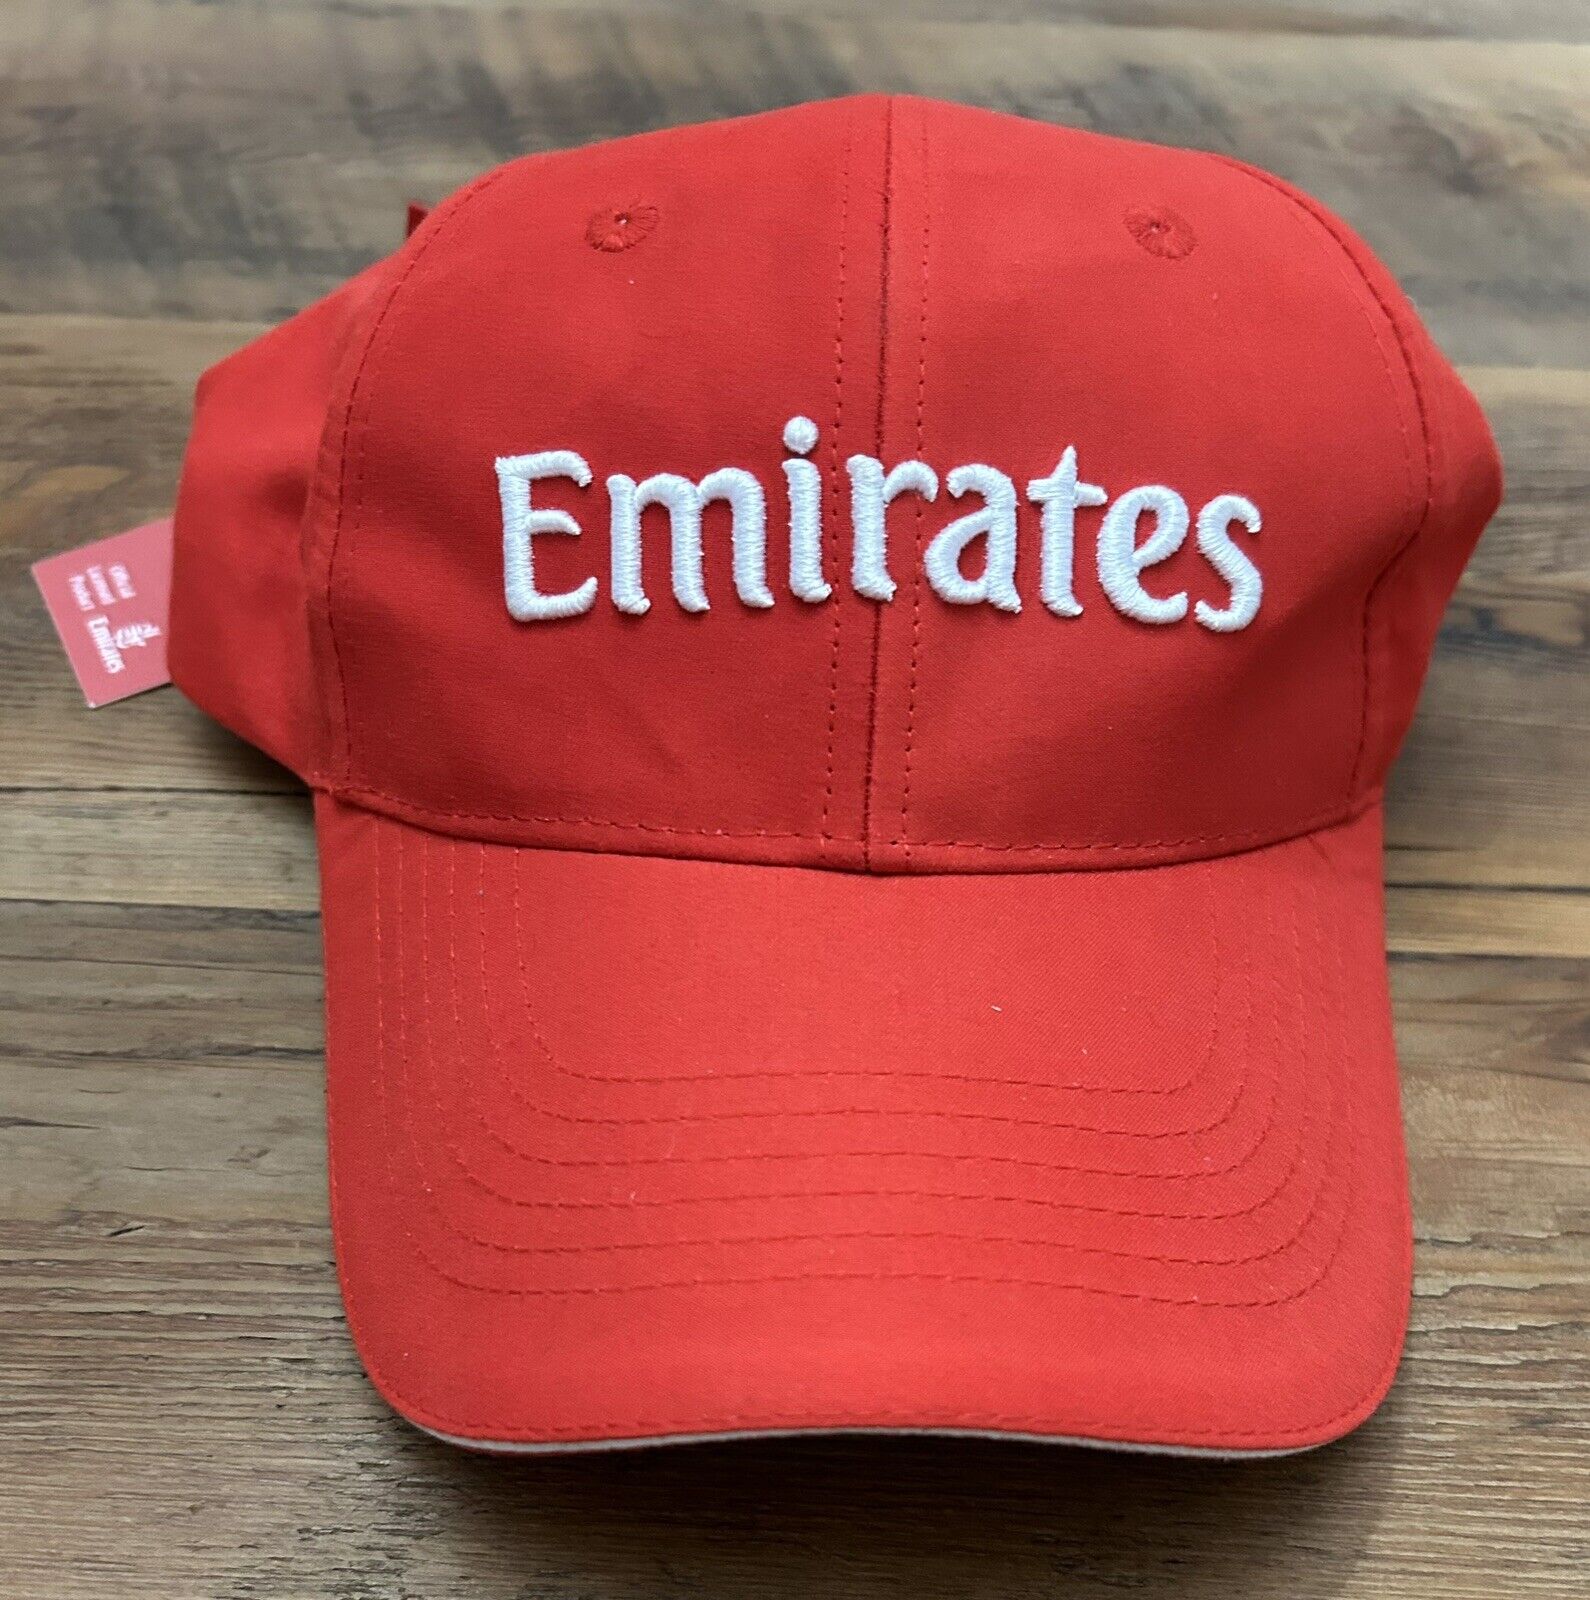 Fly Emirates Airlines Hat - Red White Embroidered Microfibre Cap NEW NWT